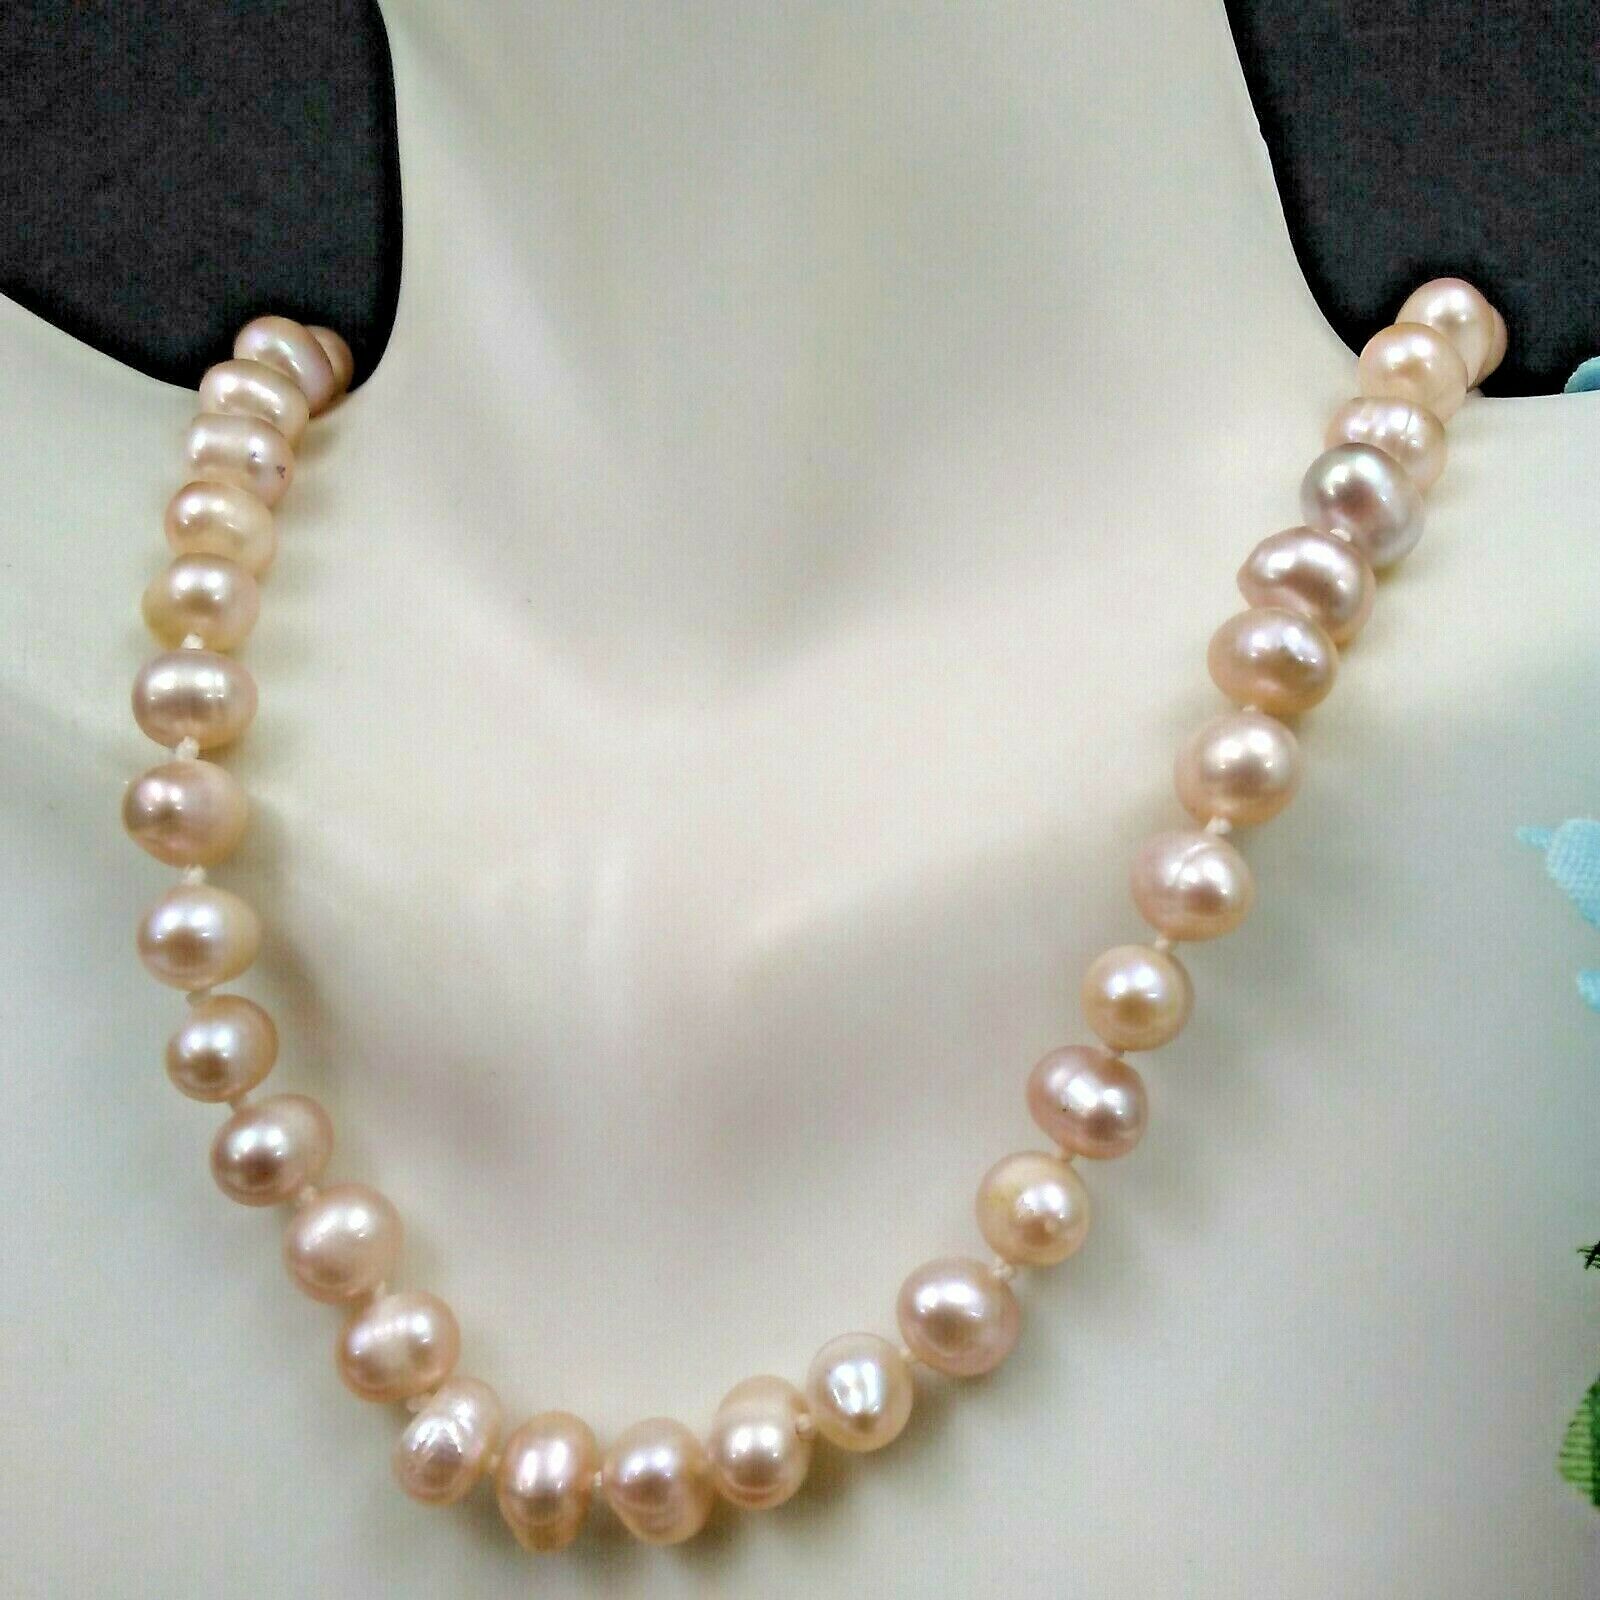 Estate Sale: Hand-knotted Real Pearl Beaded Necklace 18" #18-24